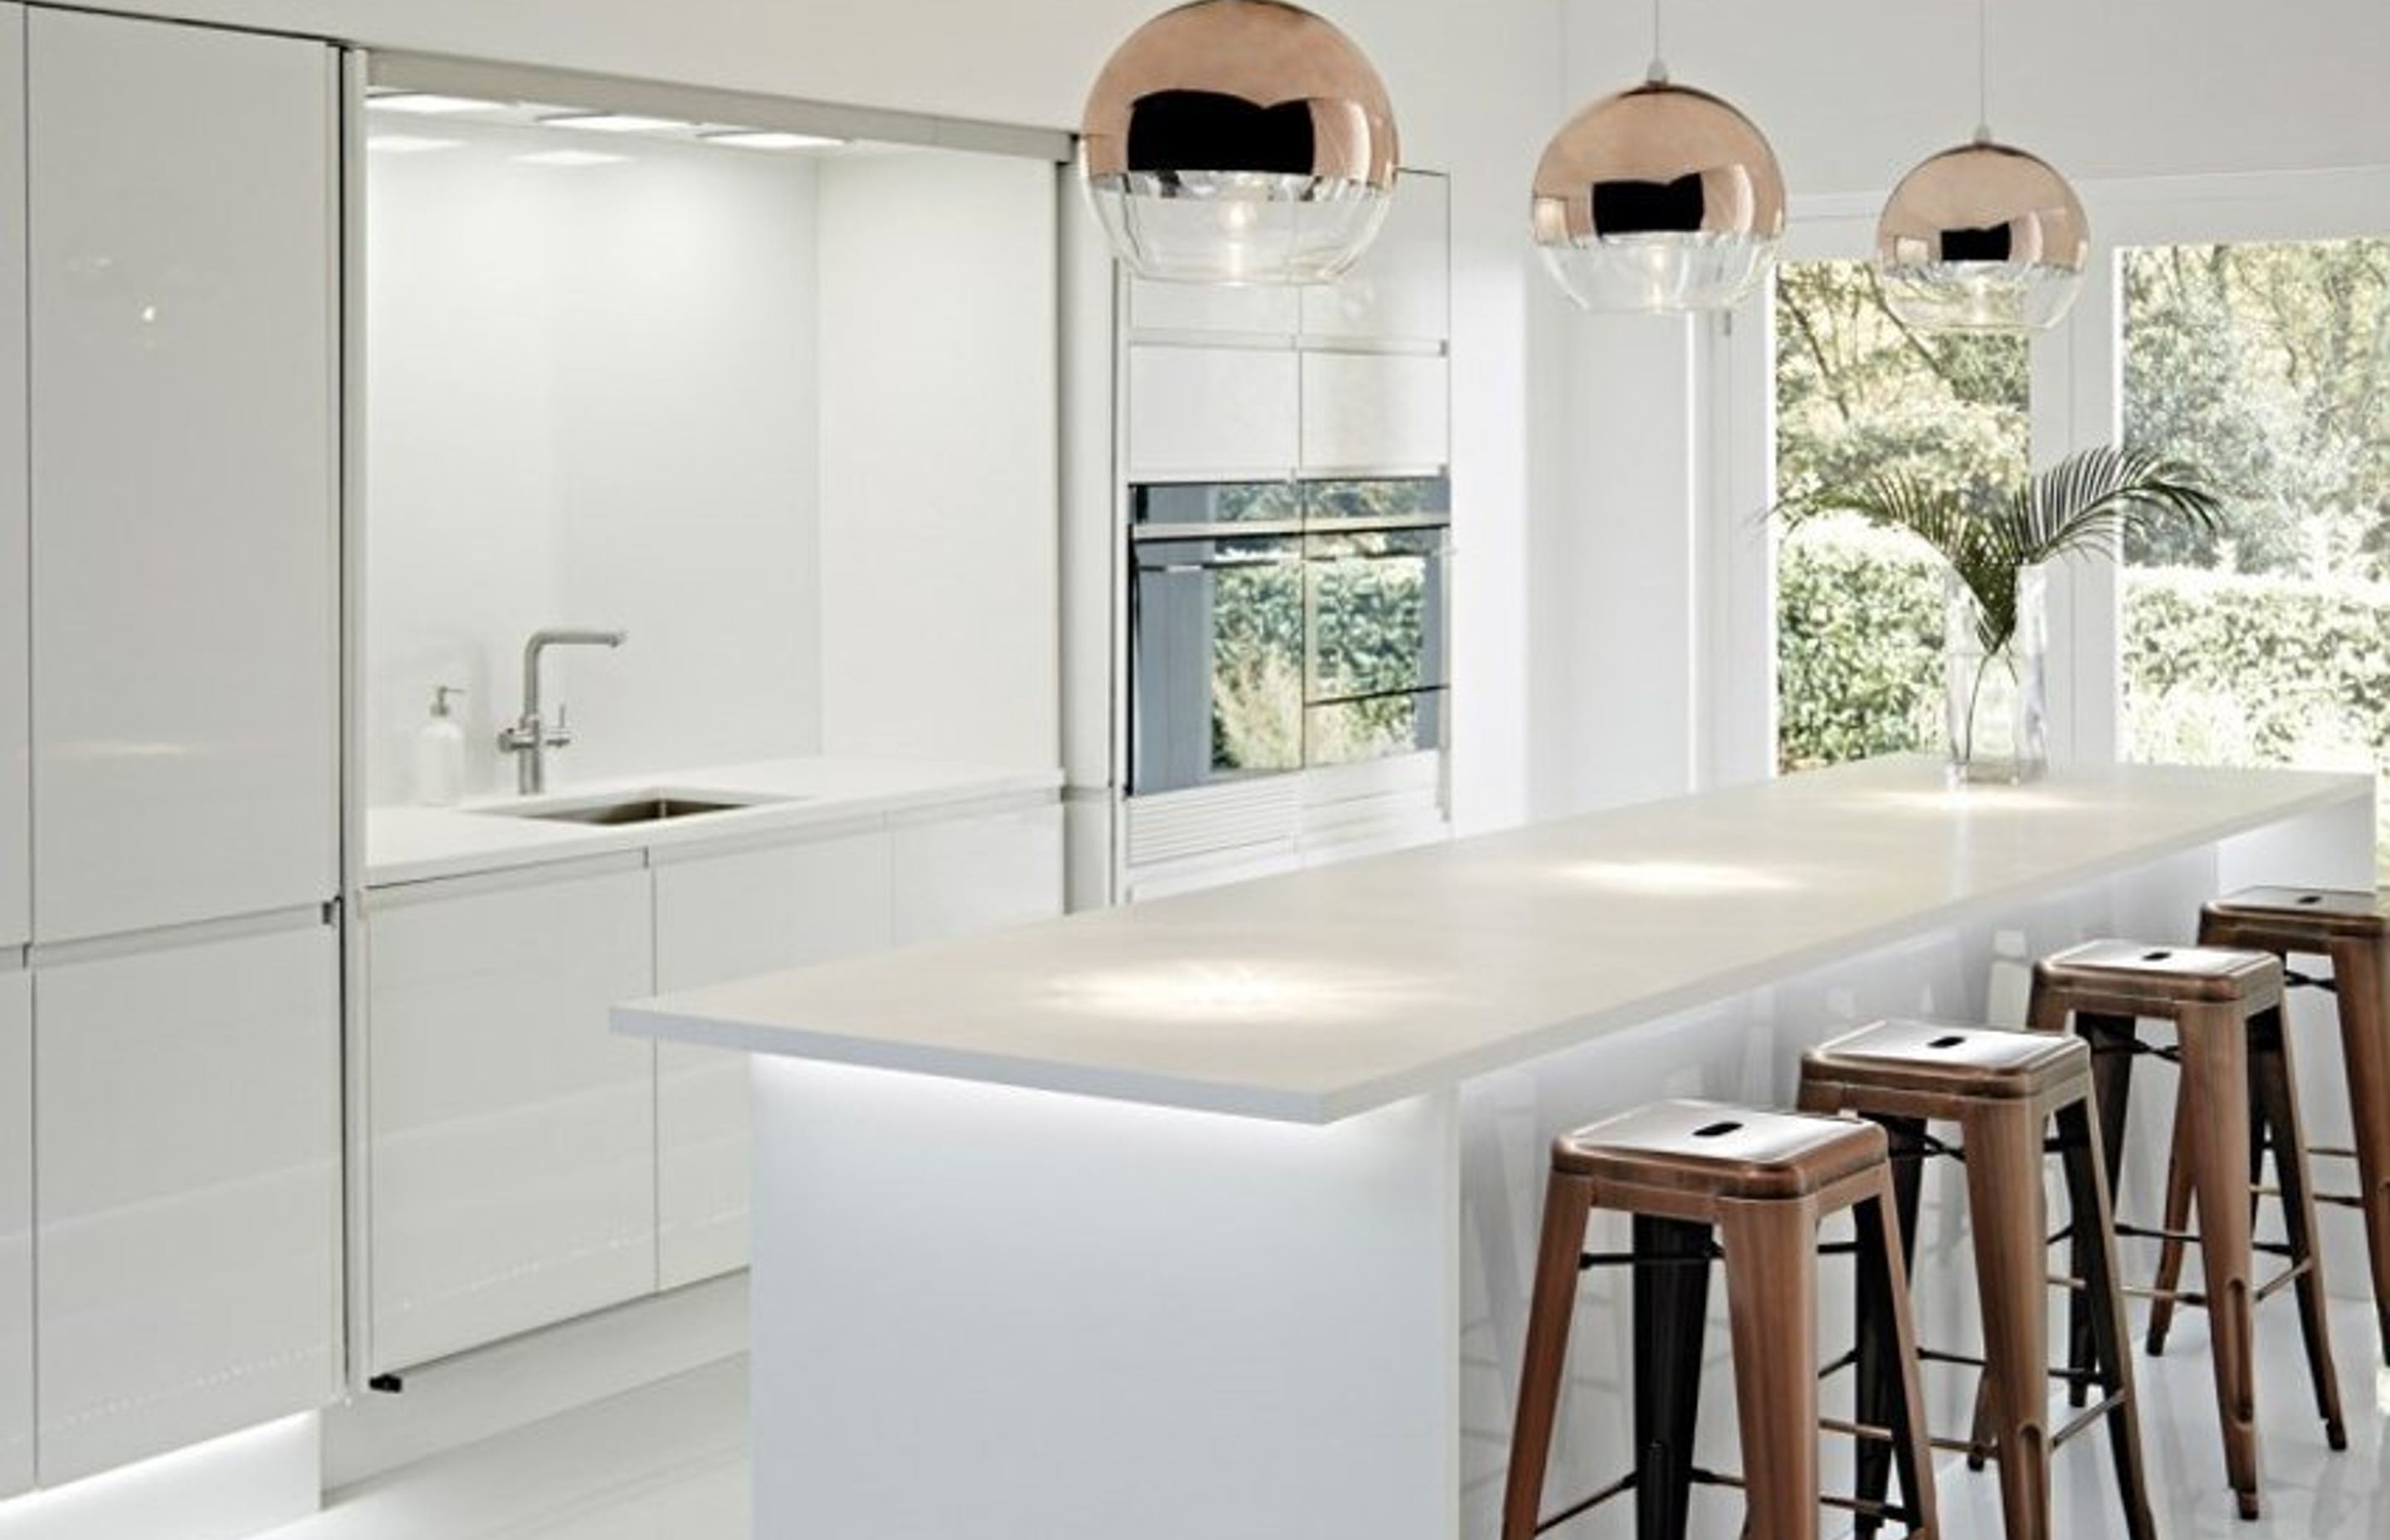 The versatile kitchen: space, function and beauty